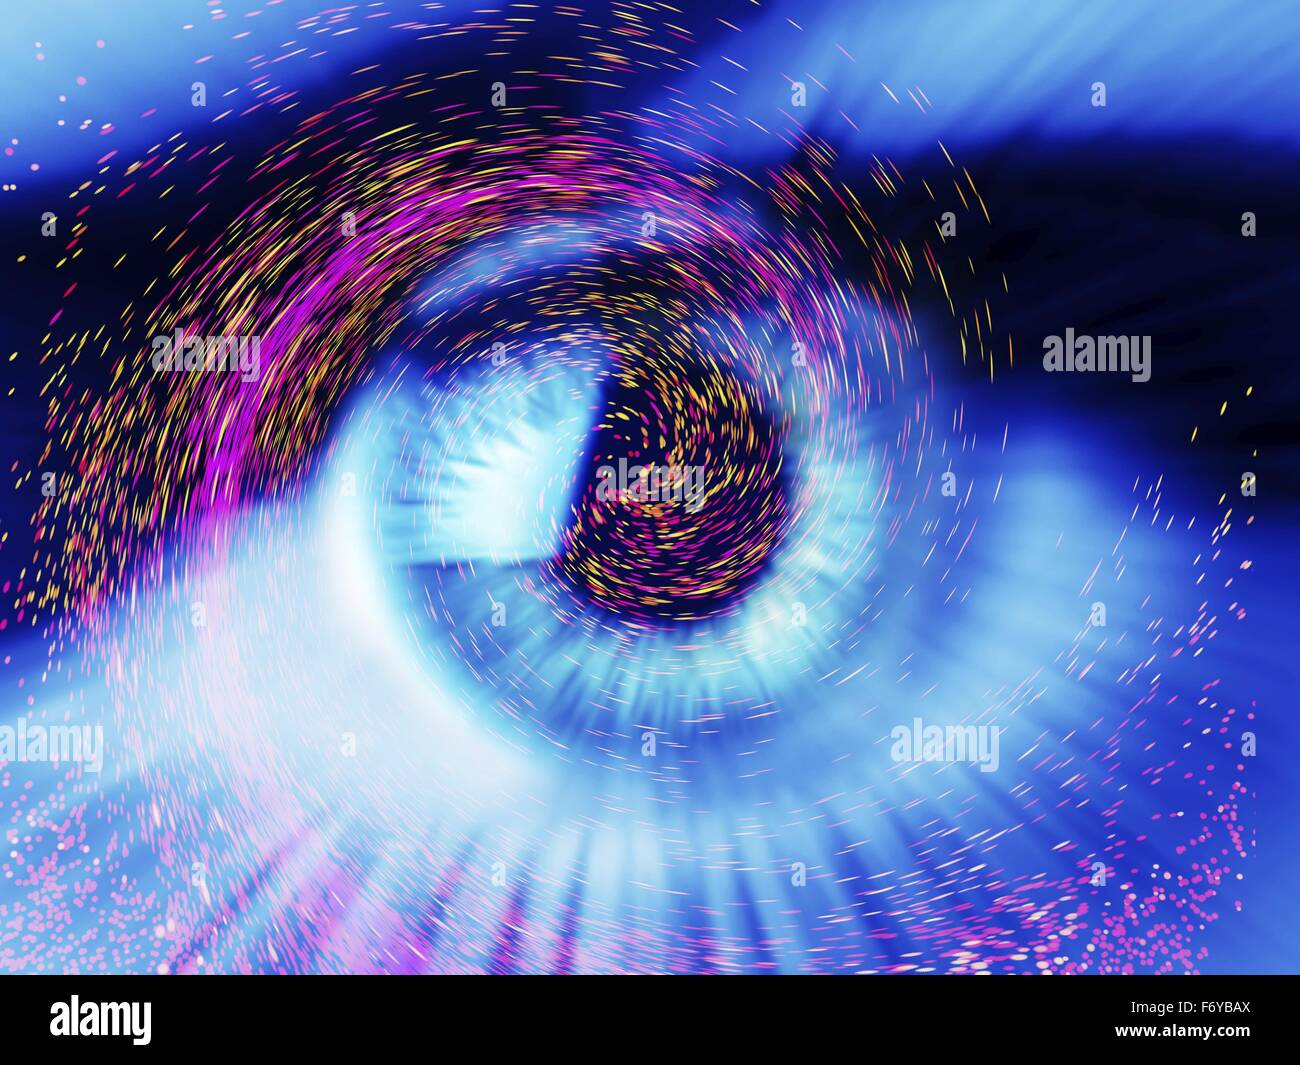 Photograph of a human eye overlaid computer artwork of colourful particles, depicting fantasy, imagination, dreaming, physics, light or stars. Stock Photo